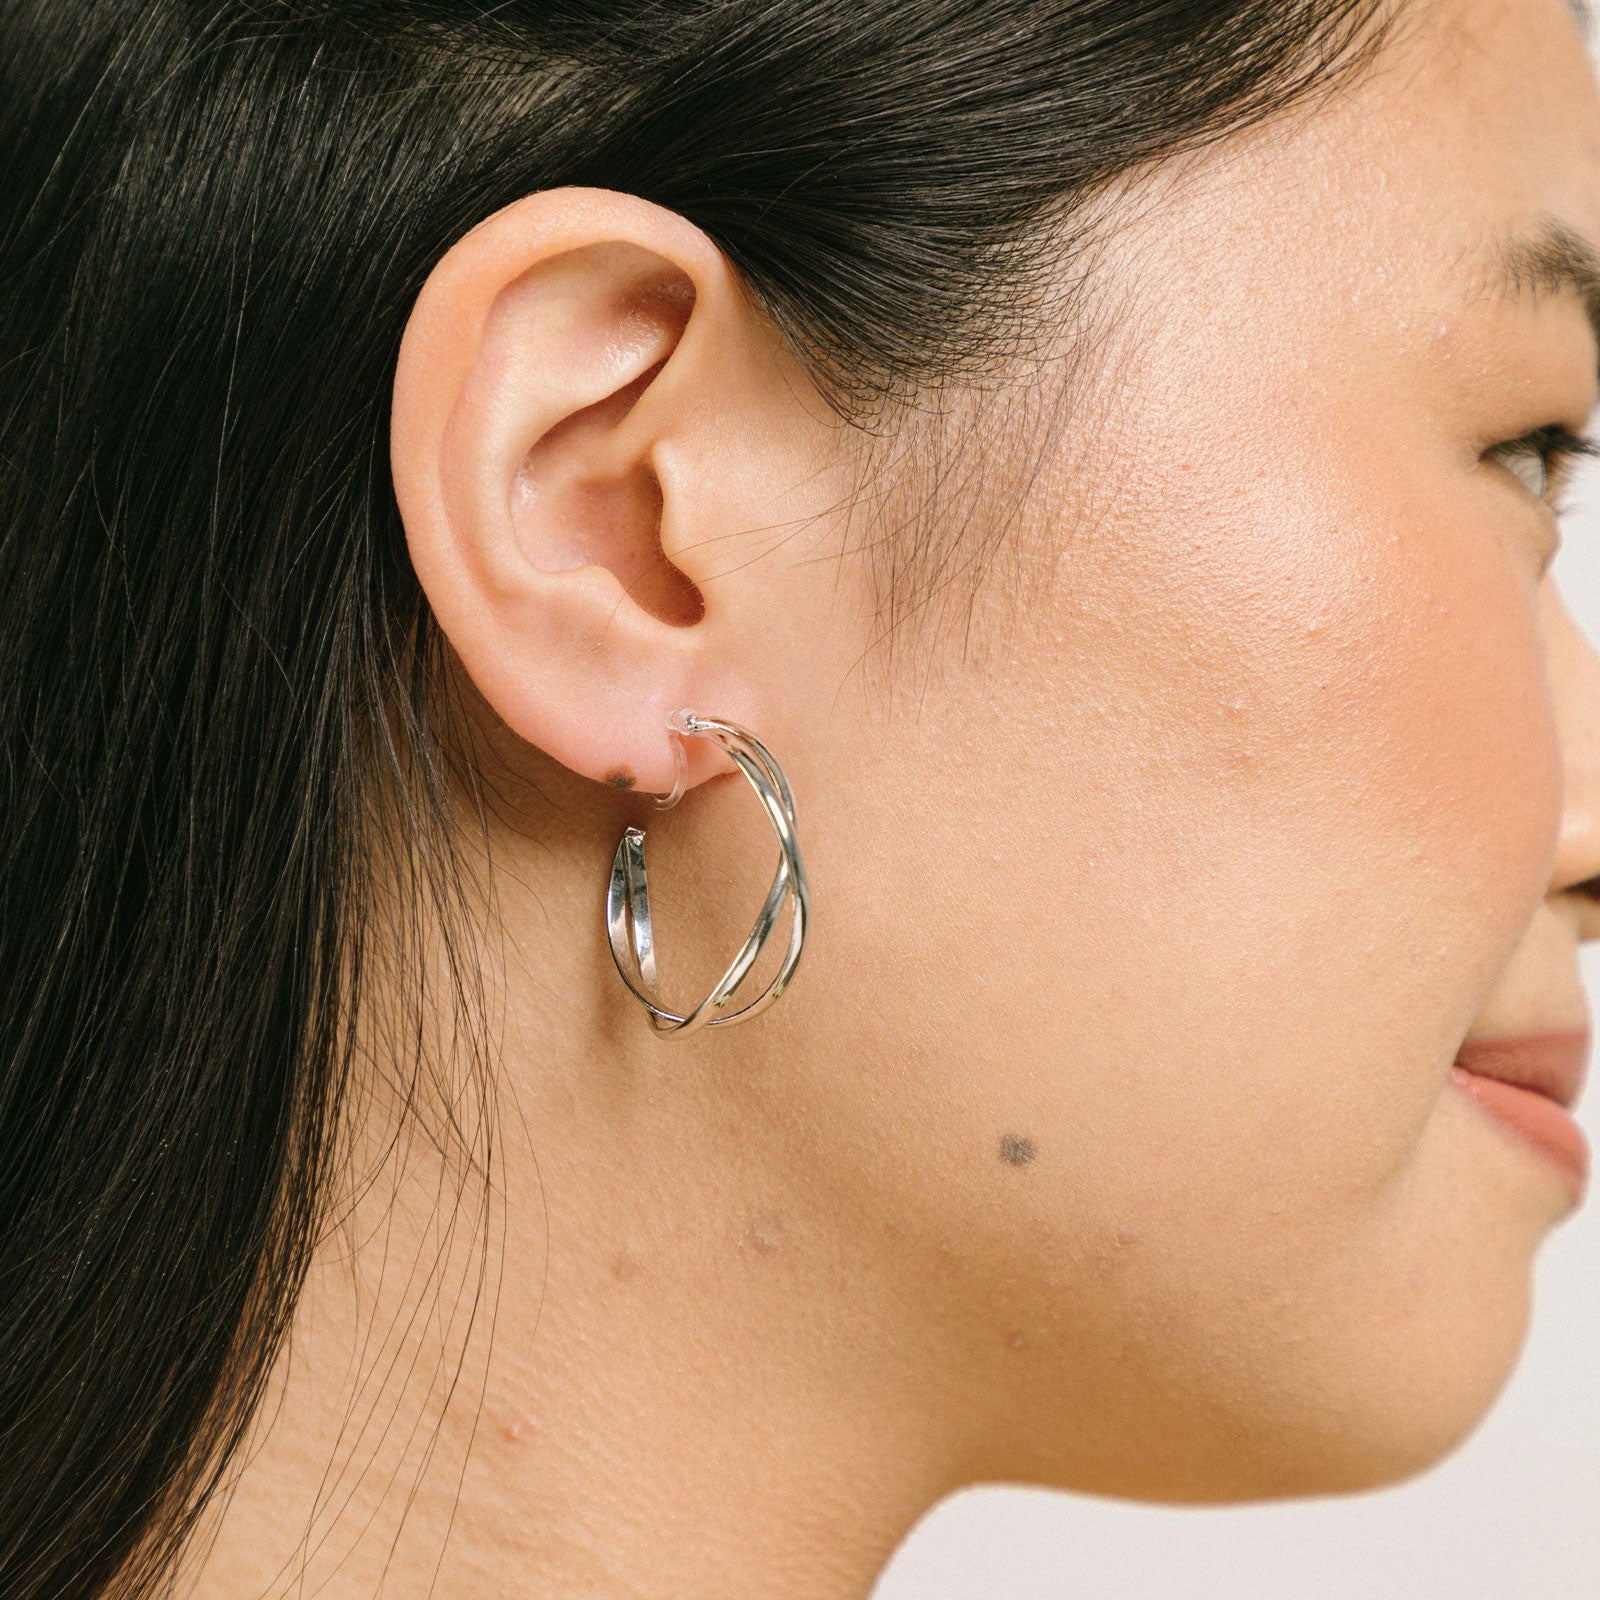 A model wearing the Silver Vienna Hoop Clip-On Earrings are crafted of Silver Tone Metal Alloy and feature a resin clip-on closure. These earrings are suited for all ear types, providing a medium-secure hold and an 8-12 hour average comfortable wear duration. Adjustment is not possible for this item; it is sold as a single pair in gold and silver.